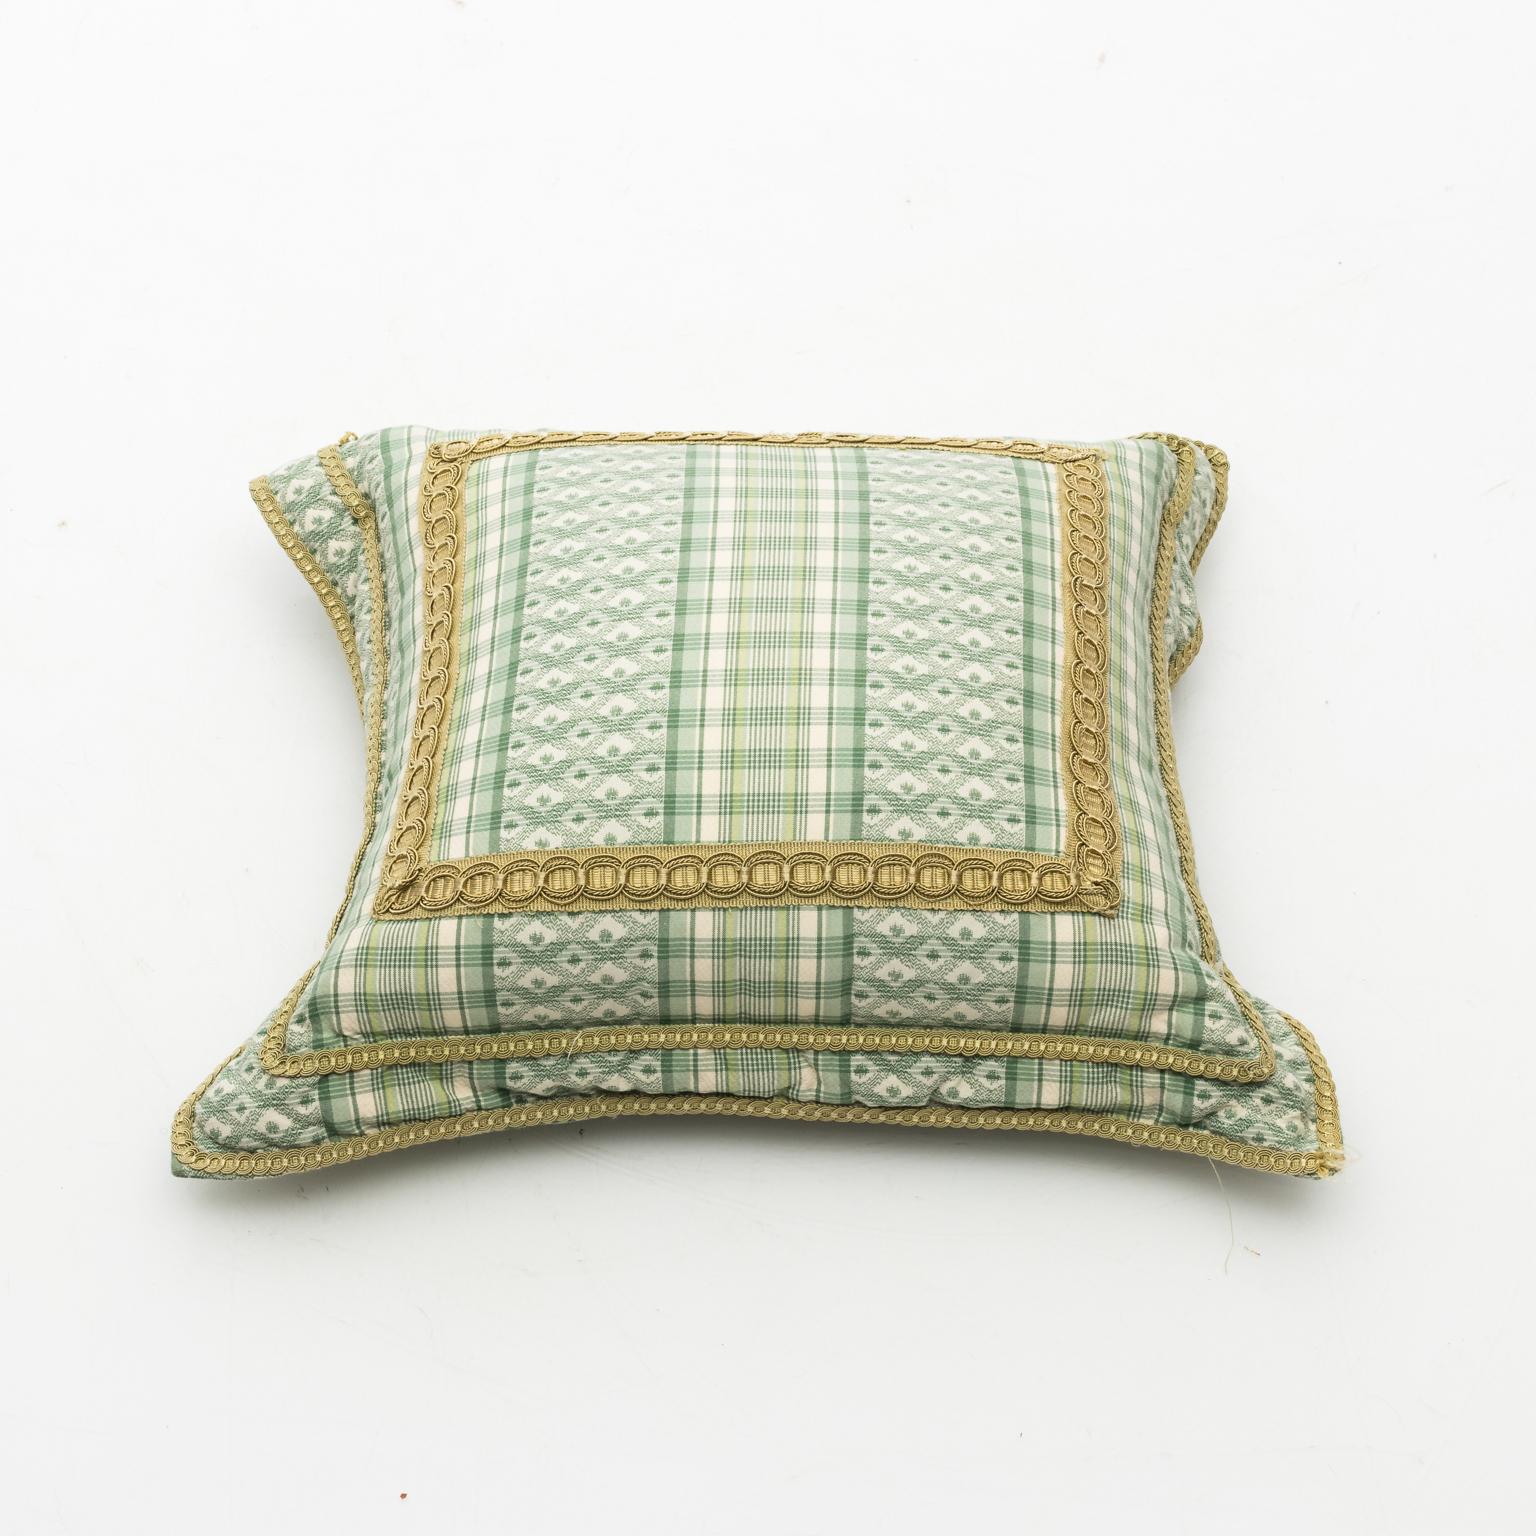 20th Century Decorative Green and White Pillows